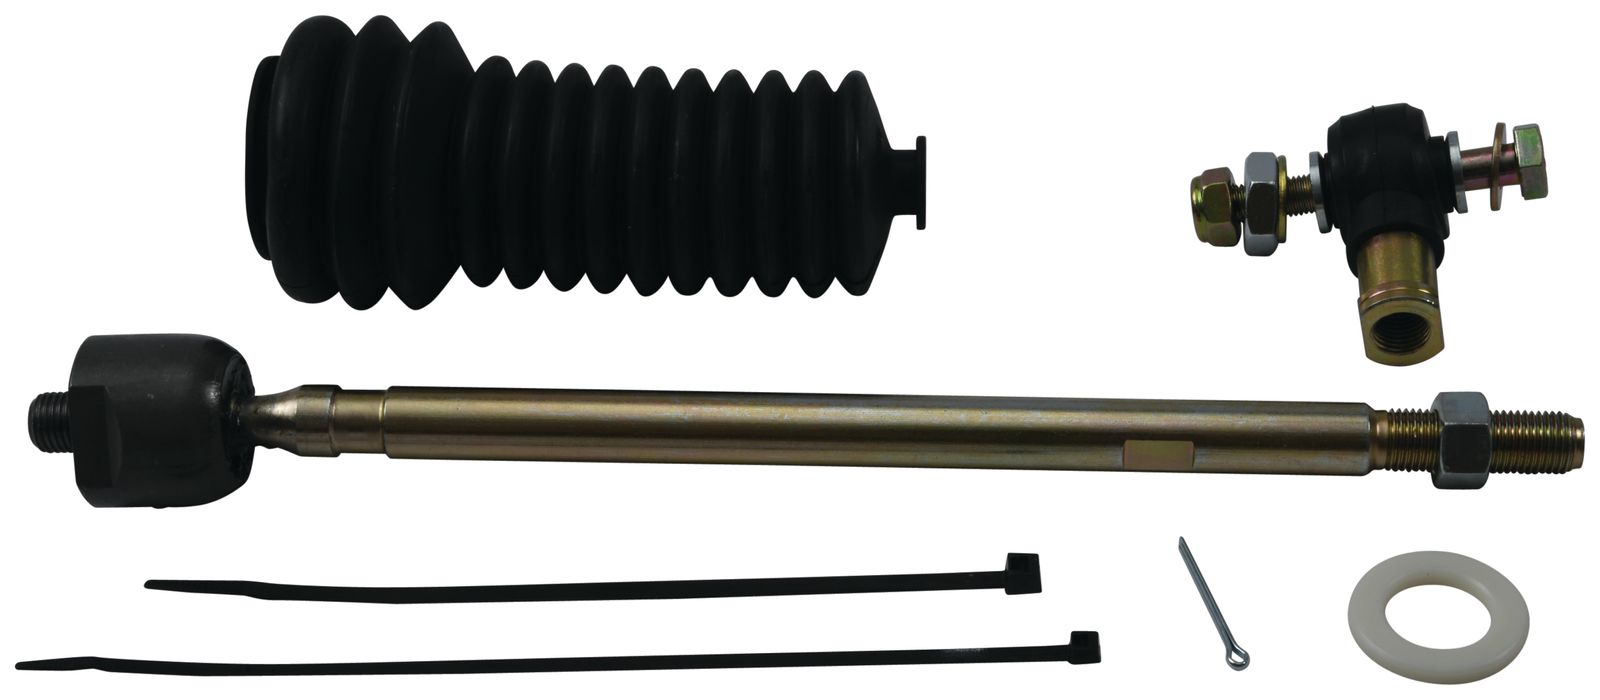 Wrp Tie Rod Ends - WRP511092-R image